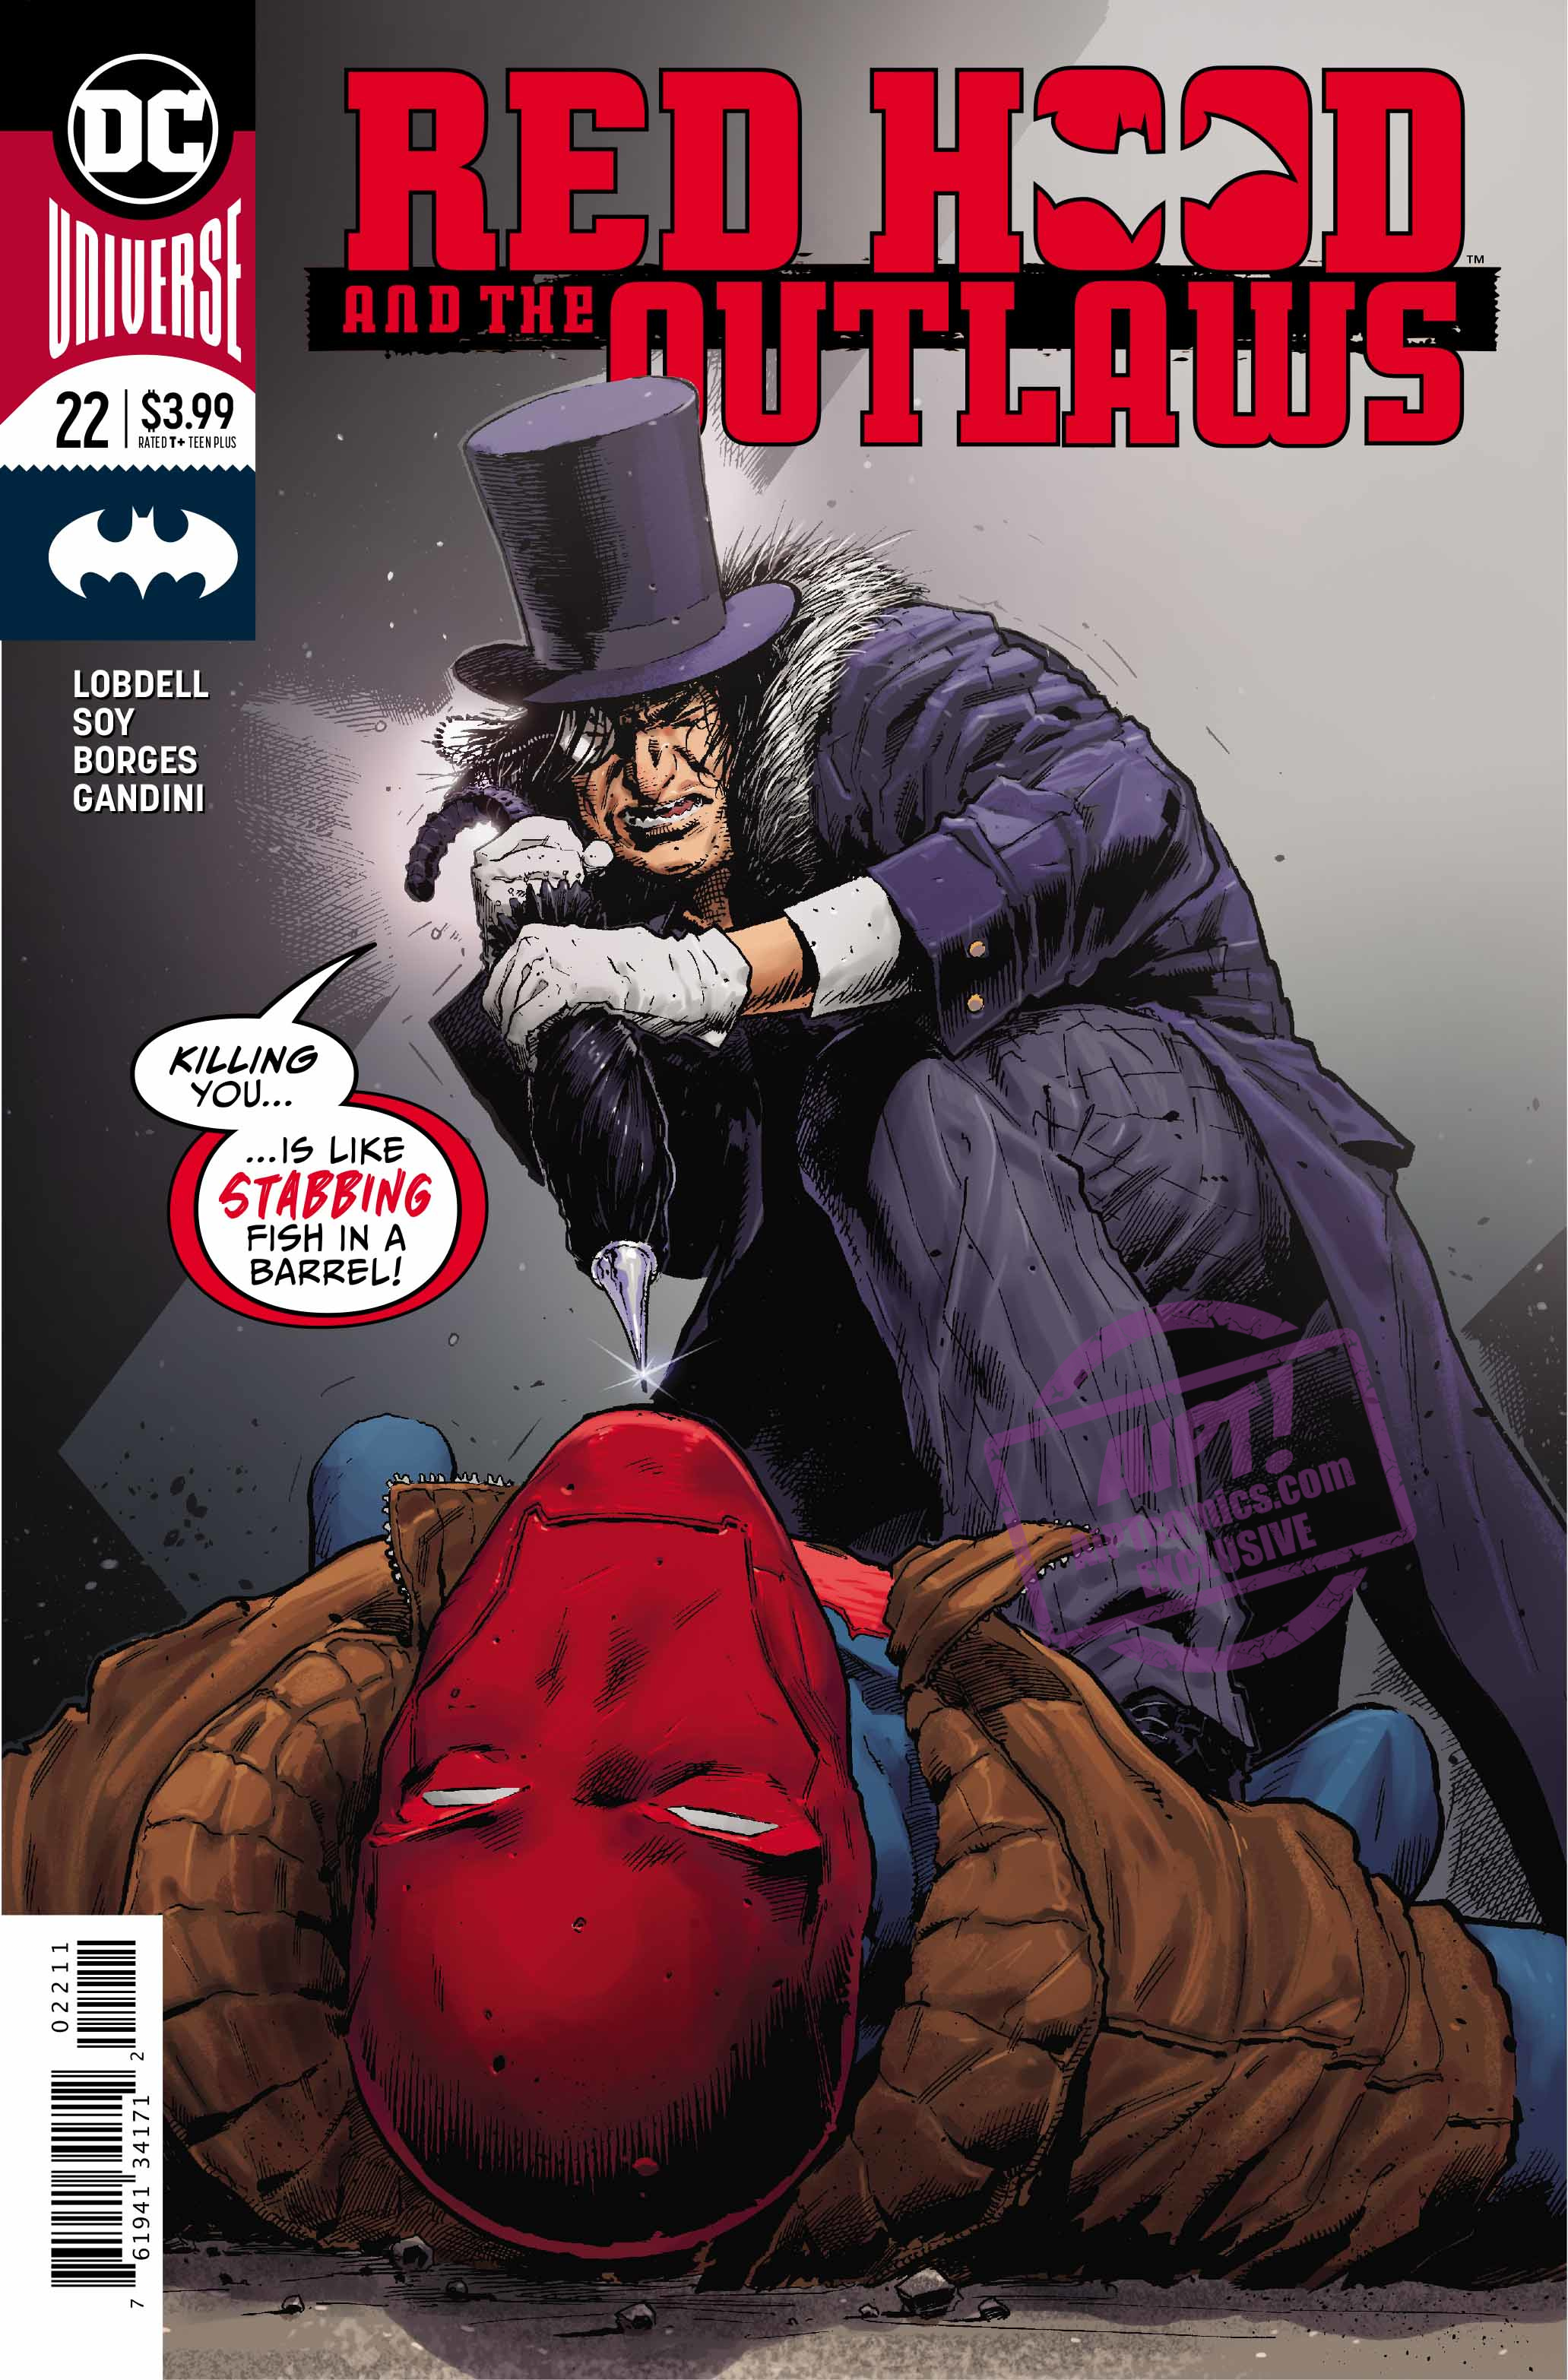 Red Hood and the Outlaws #22: An emotionally wrought setup that redefines the entire arc